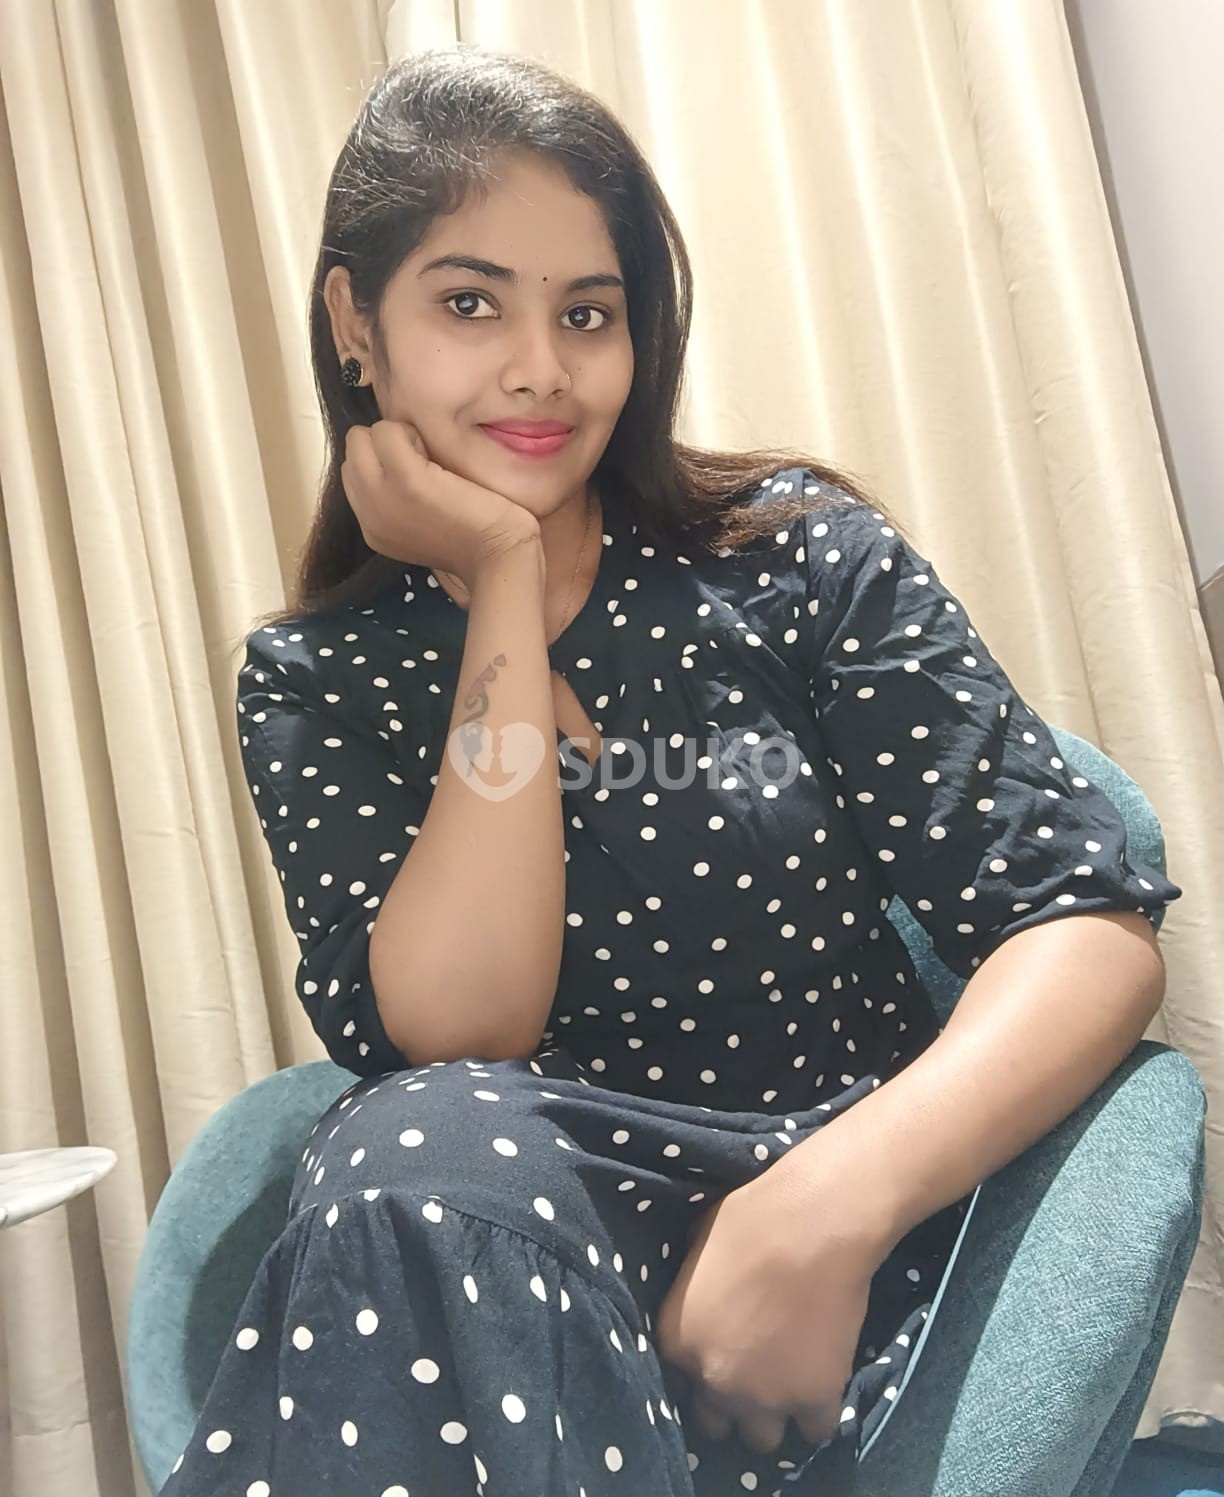 New Alipore best Vvip genuine High profile college girls available for doorstep incall outcall full safe and secure full